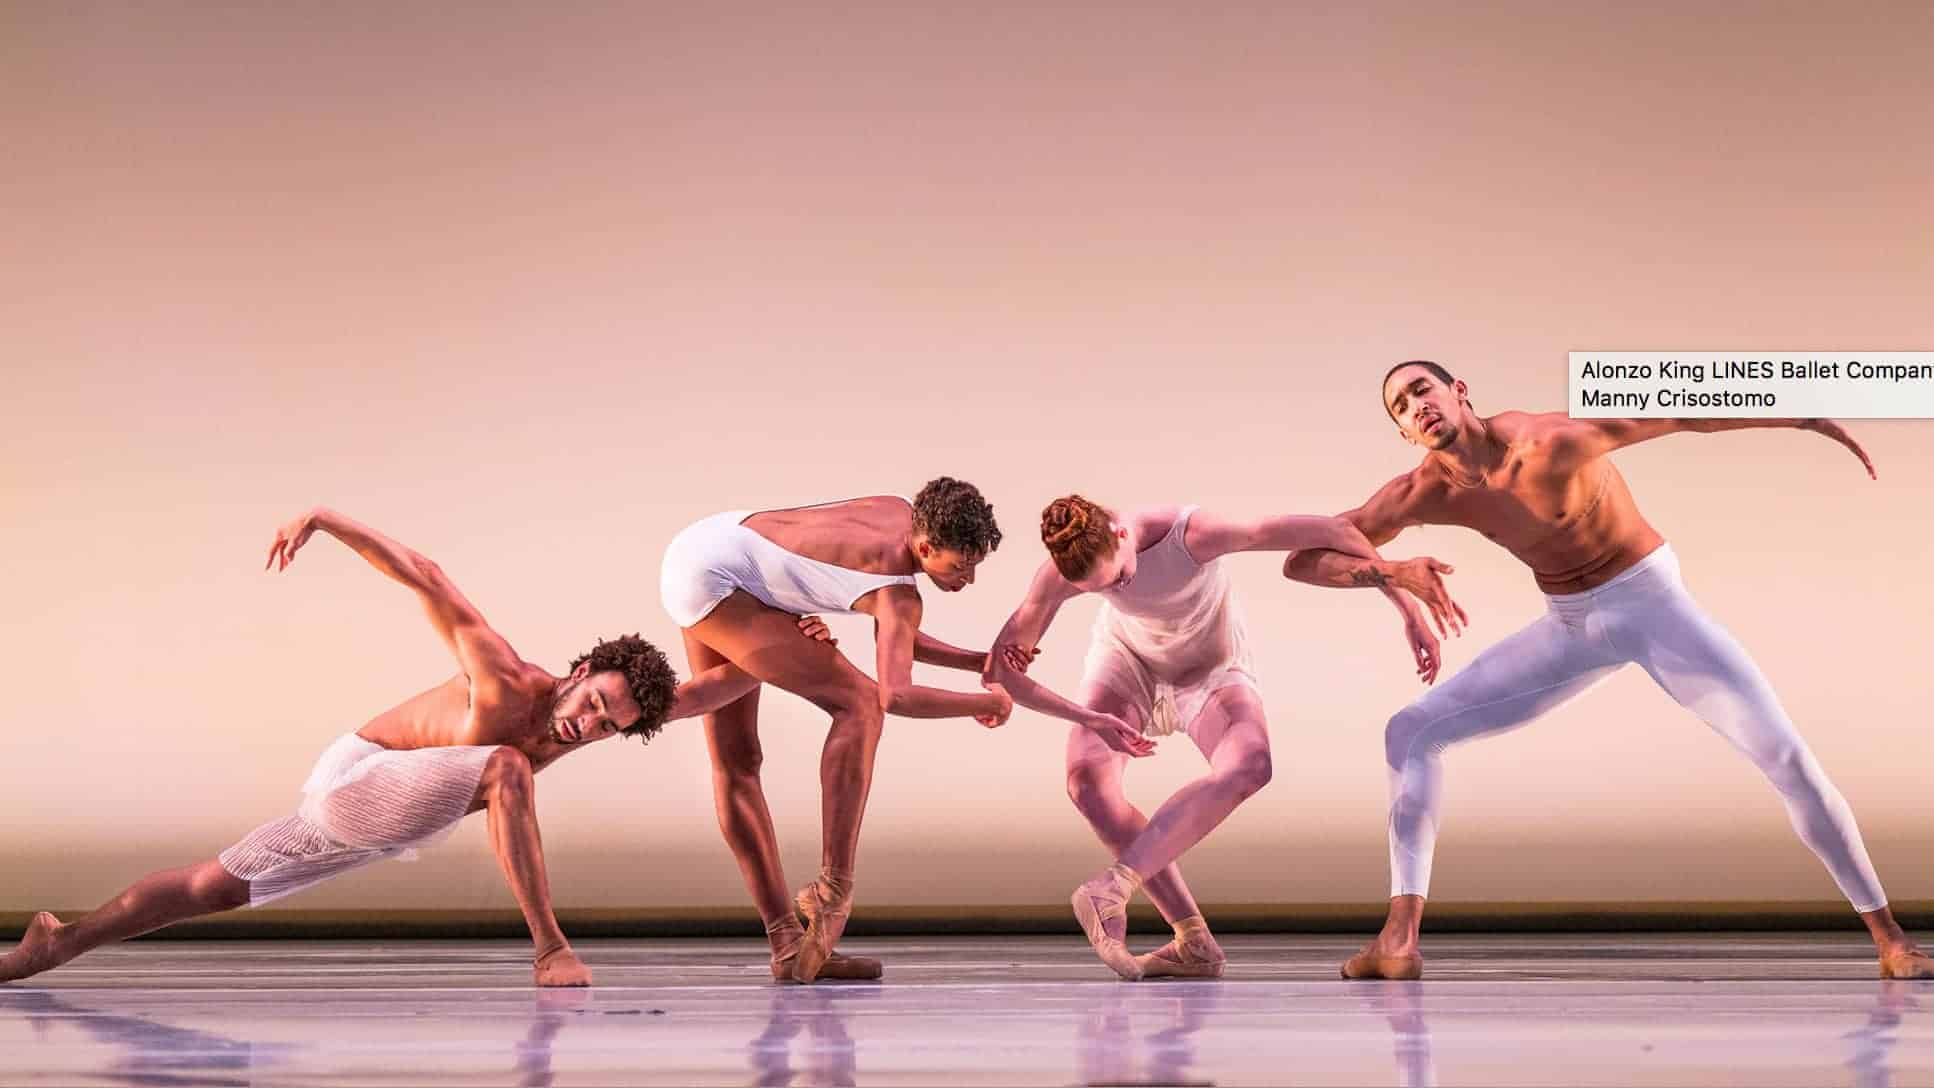 Alonzo King Lines Ballet will perform works set to music by composers including Gabriel Fauré, Edgar Meyer and Zakir Hussain, as well as Azoth set to music by venerable jazz musicians.